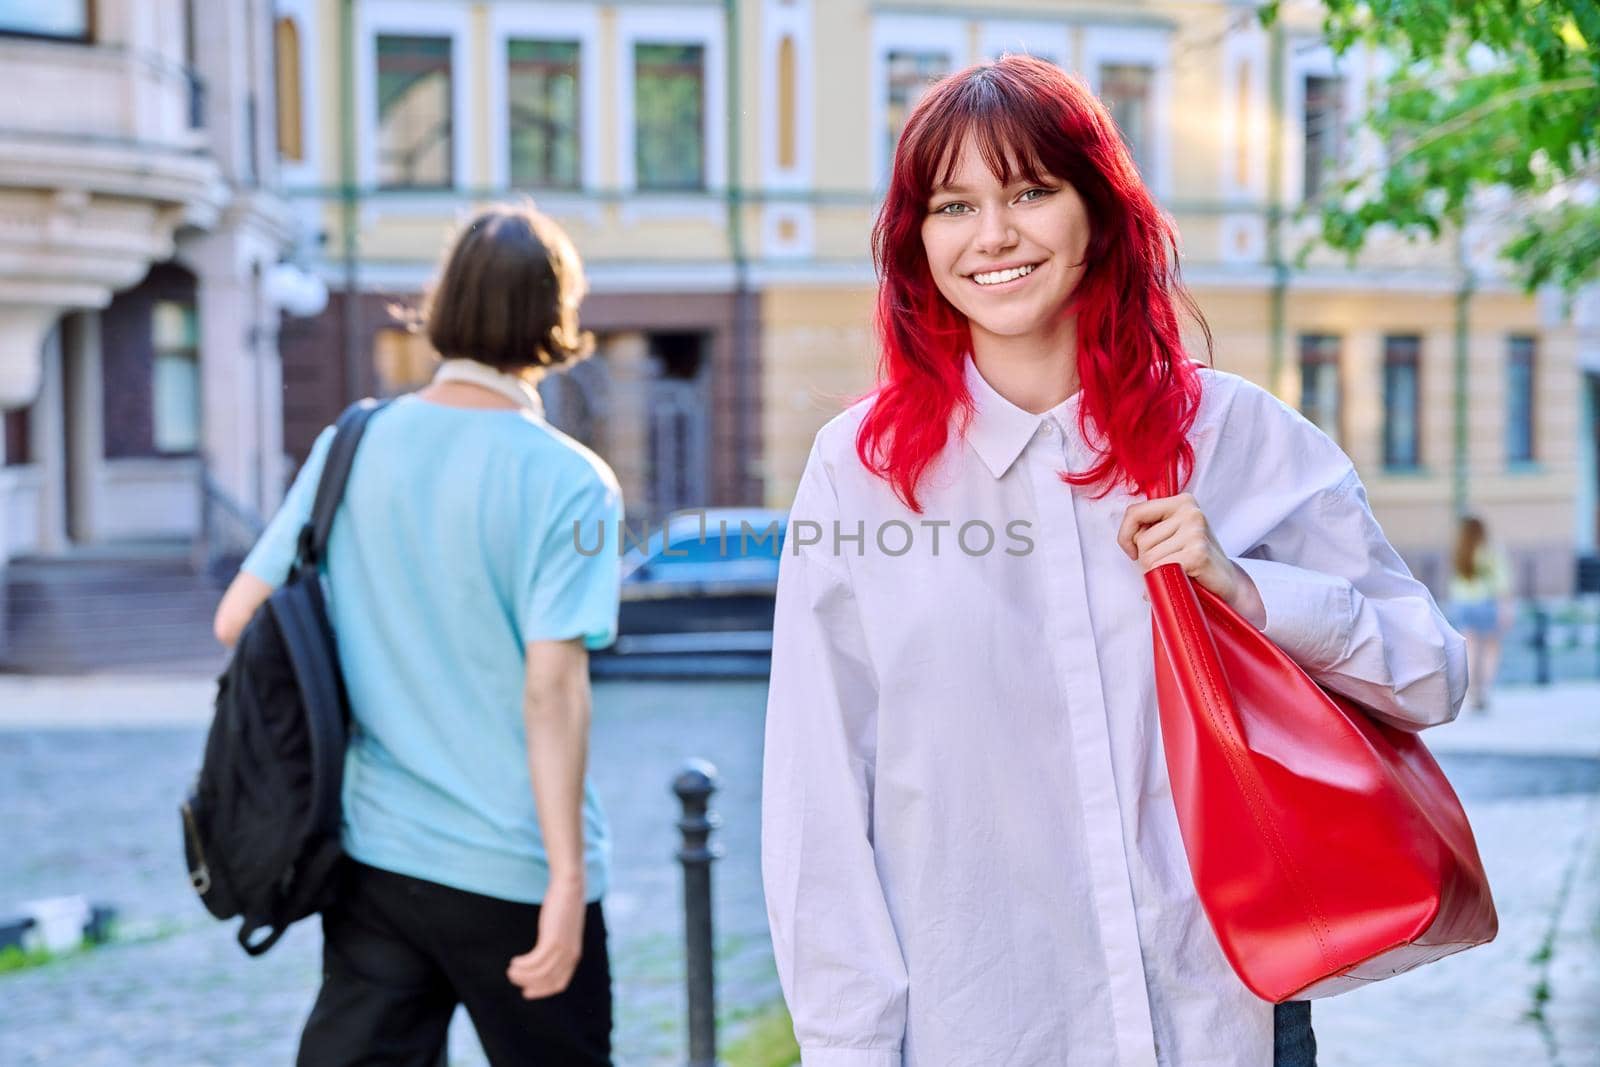 Teenage fashionable smiling female with red dyed hair looking at camera, urban style, street background, copy space. Youth, fashion, beauty, trends, people concept